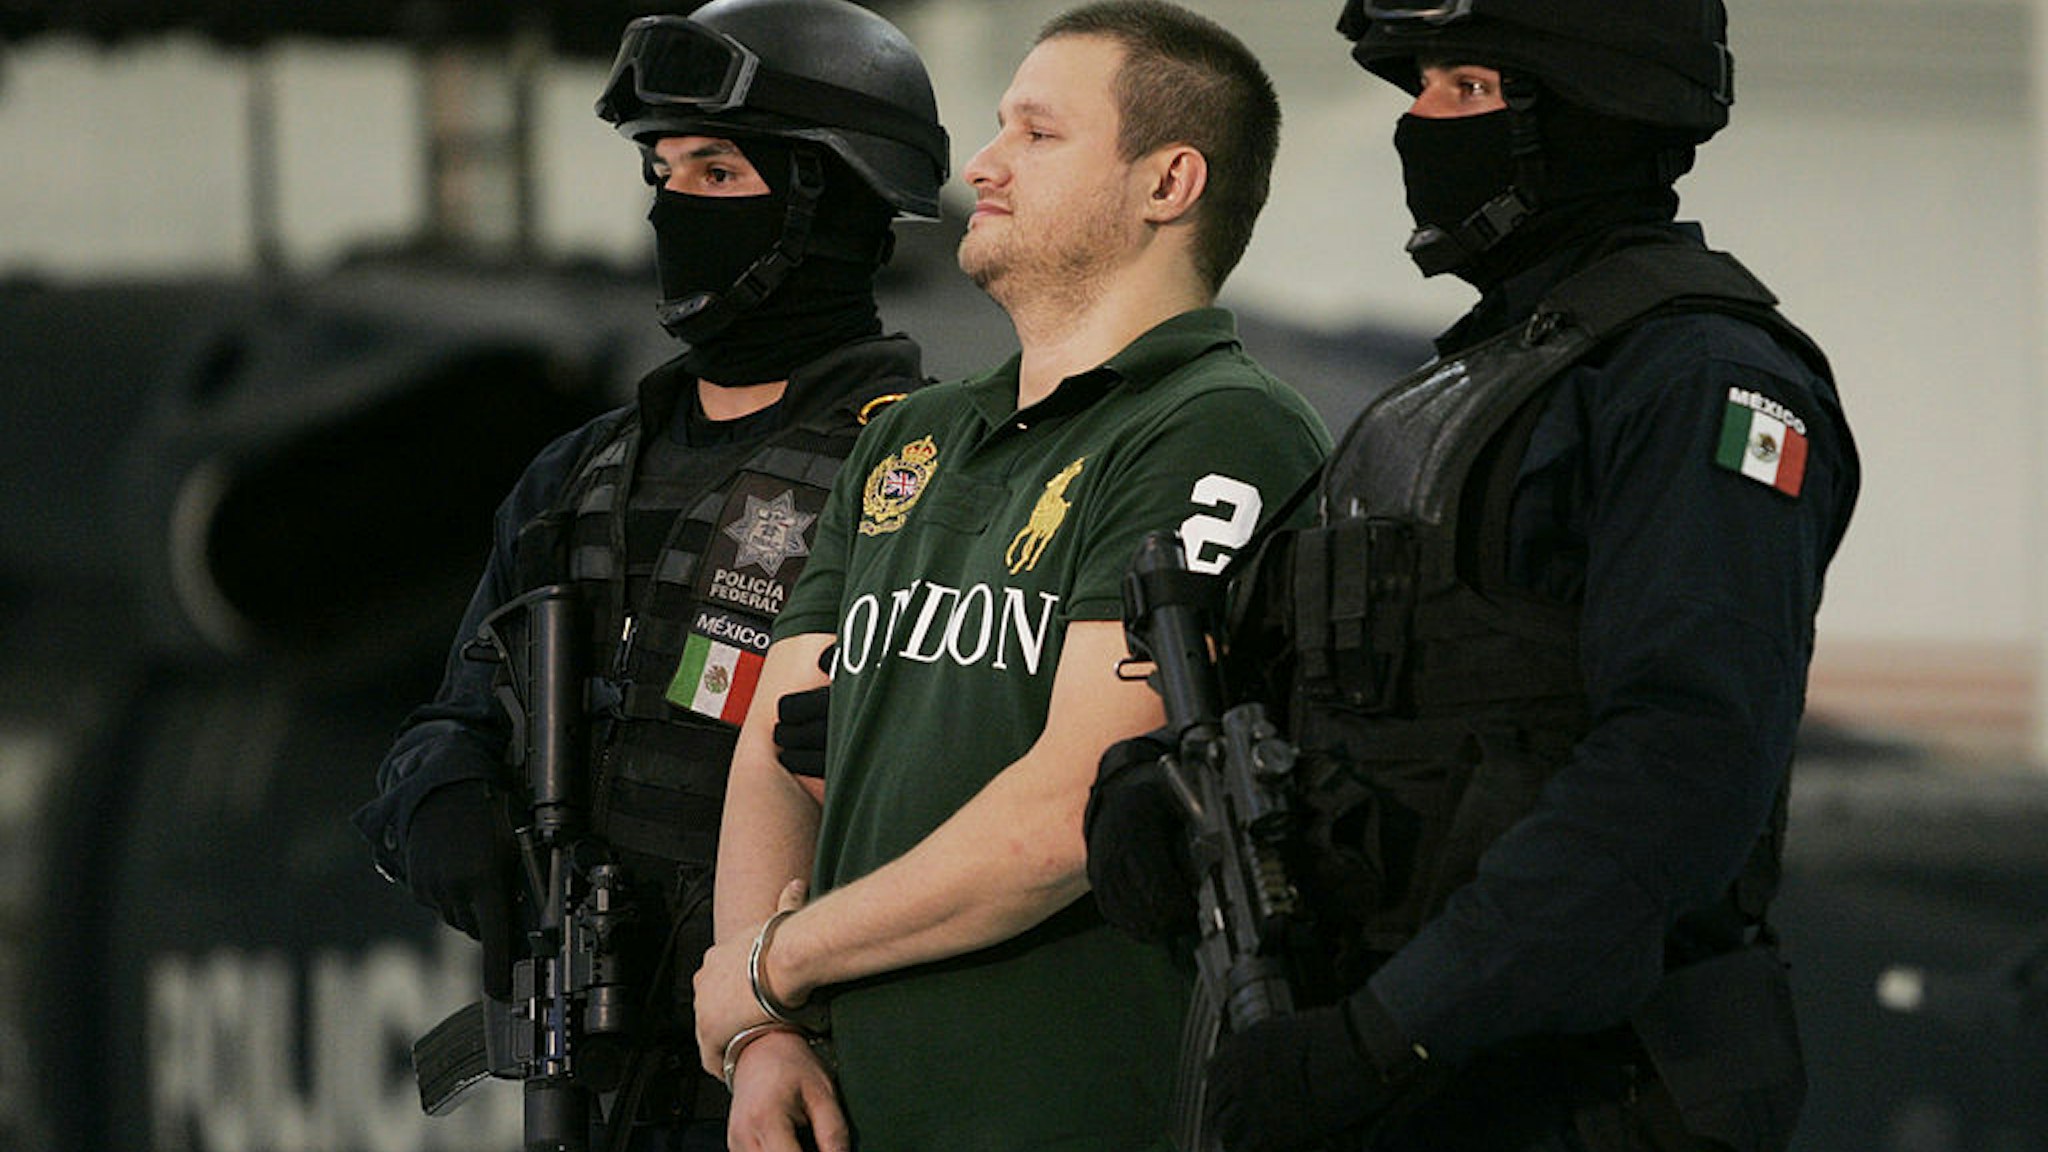 Edgar "La Barbie" Valdez Villarreal is shown to the press during a news conference at the federal police center August 31, 2010 in Mexico City, Mexico.